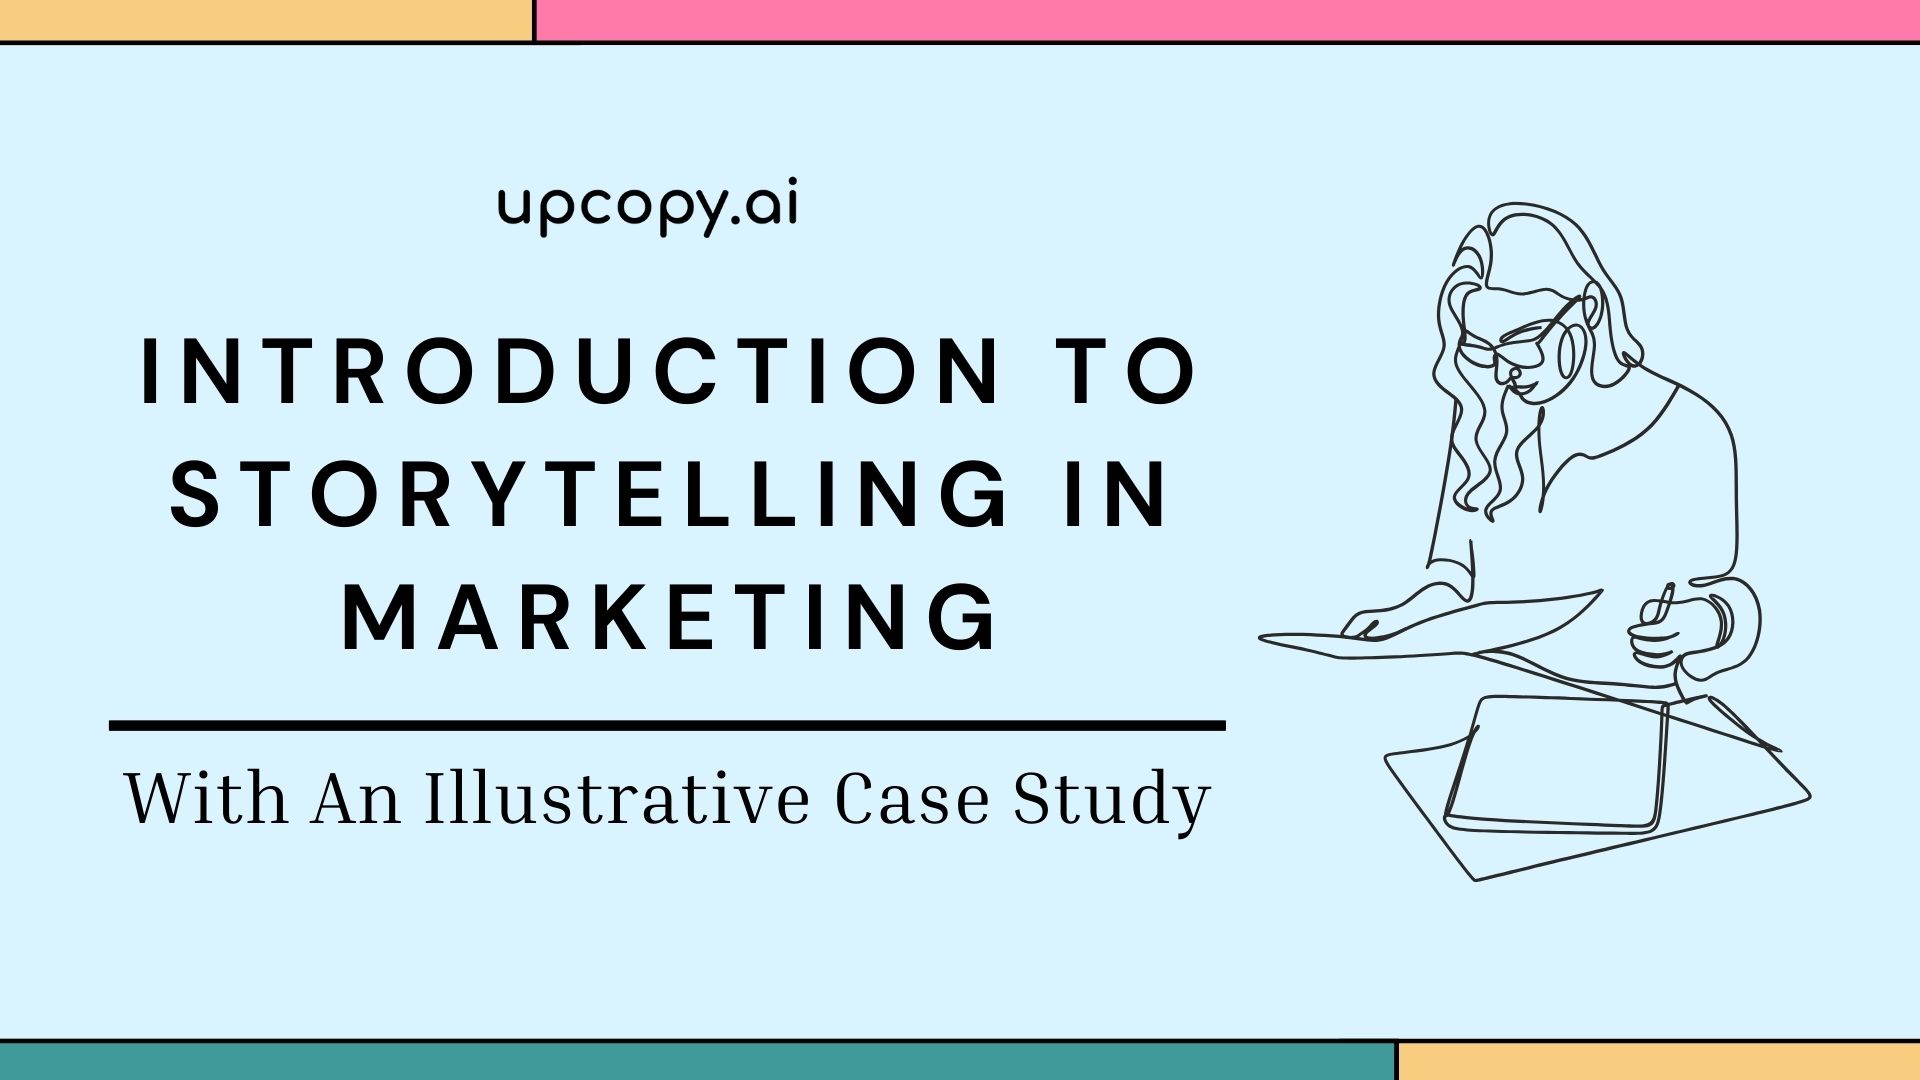 Introduction to Storytelling in Marketing with upcopy.ai